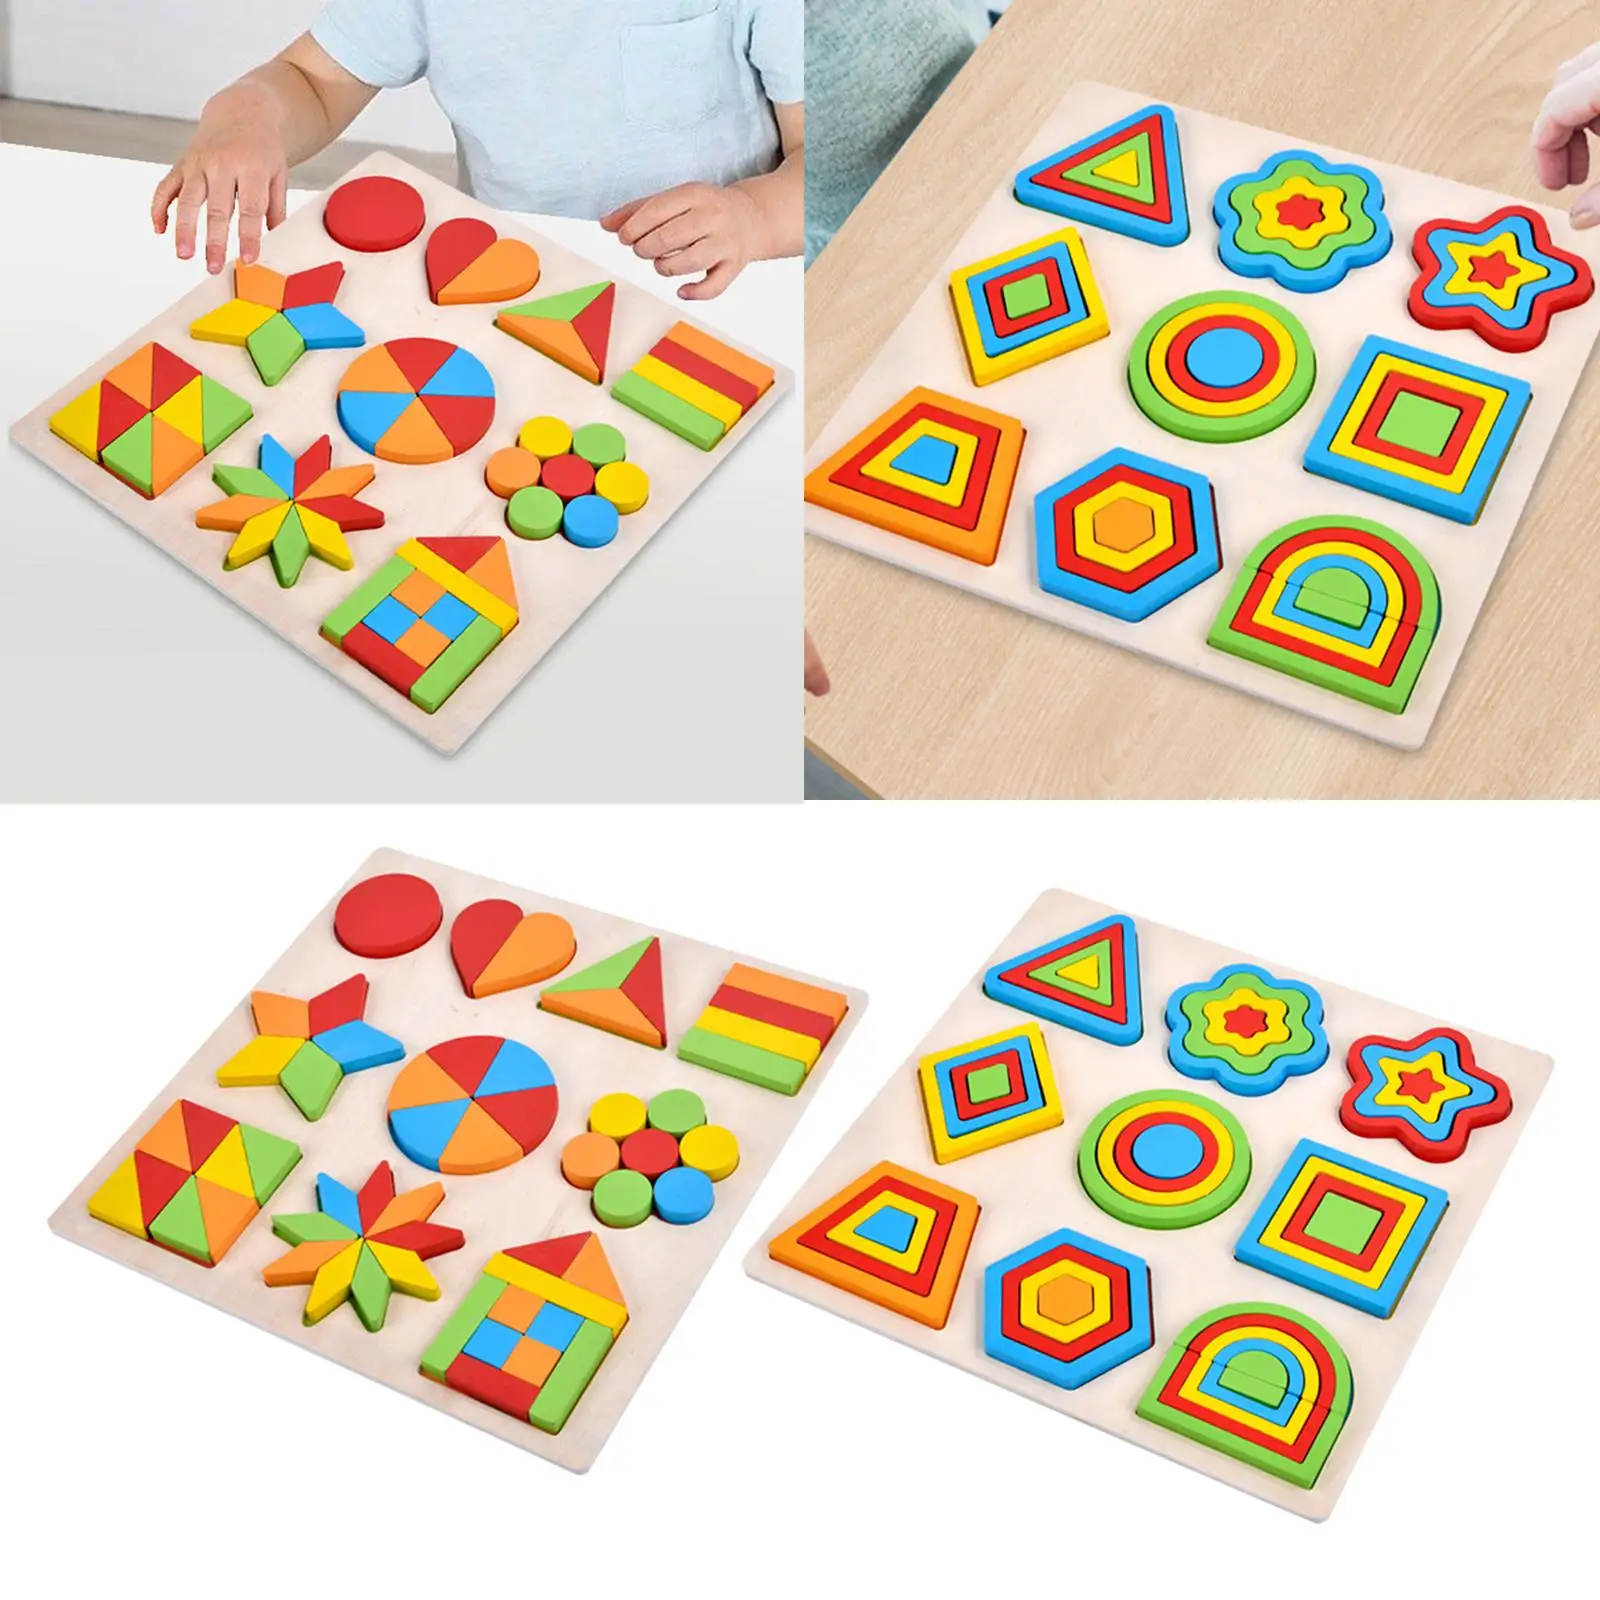 Shape Sorting Puzzle Learning Activities Fine Motor Skills Manipulative Puzzle for Girls Boys Toddlers Children Birthday Gift